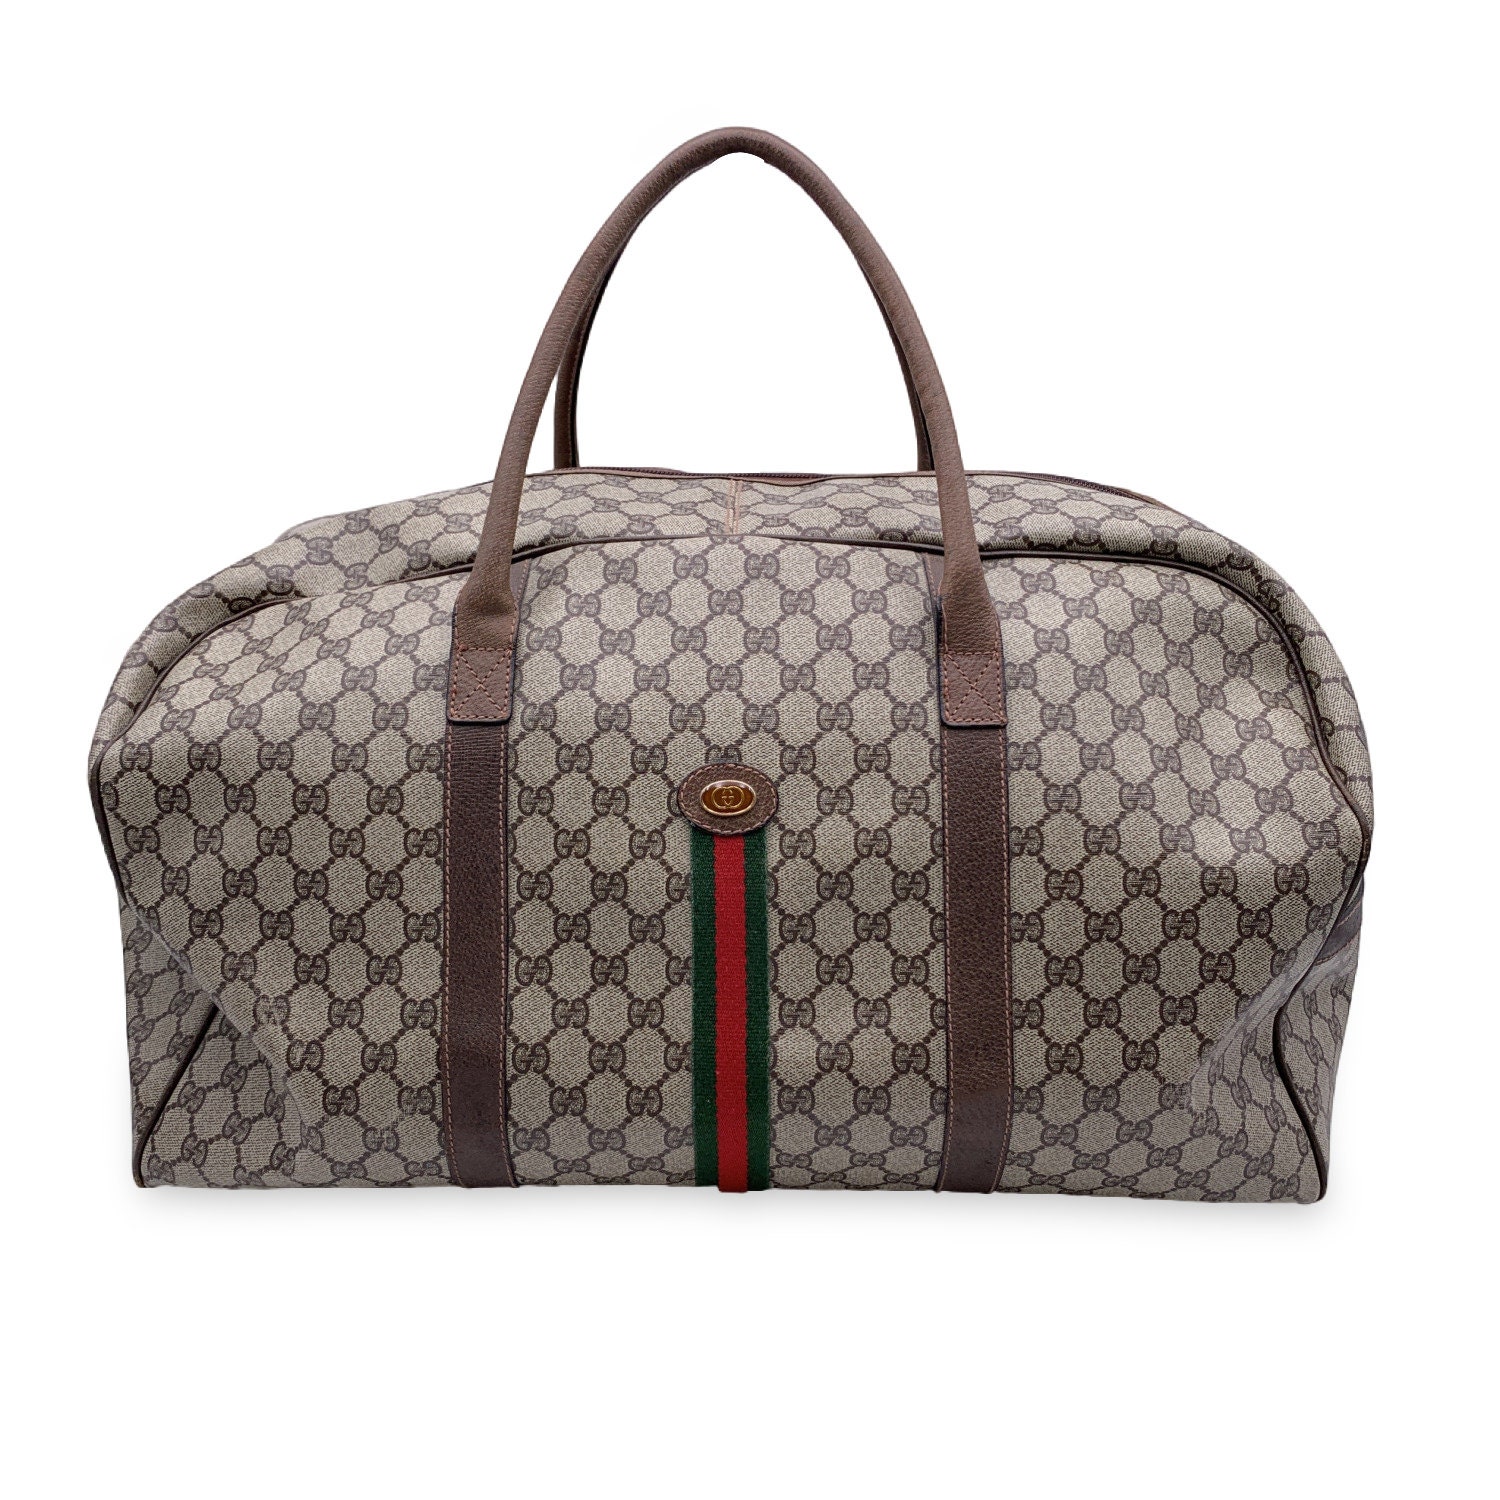 Gucci Beige/Blue GG Supreme Star Canvas Large Carry On Duffle Bag